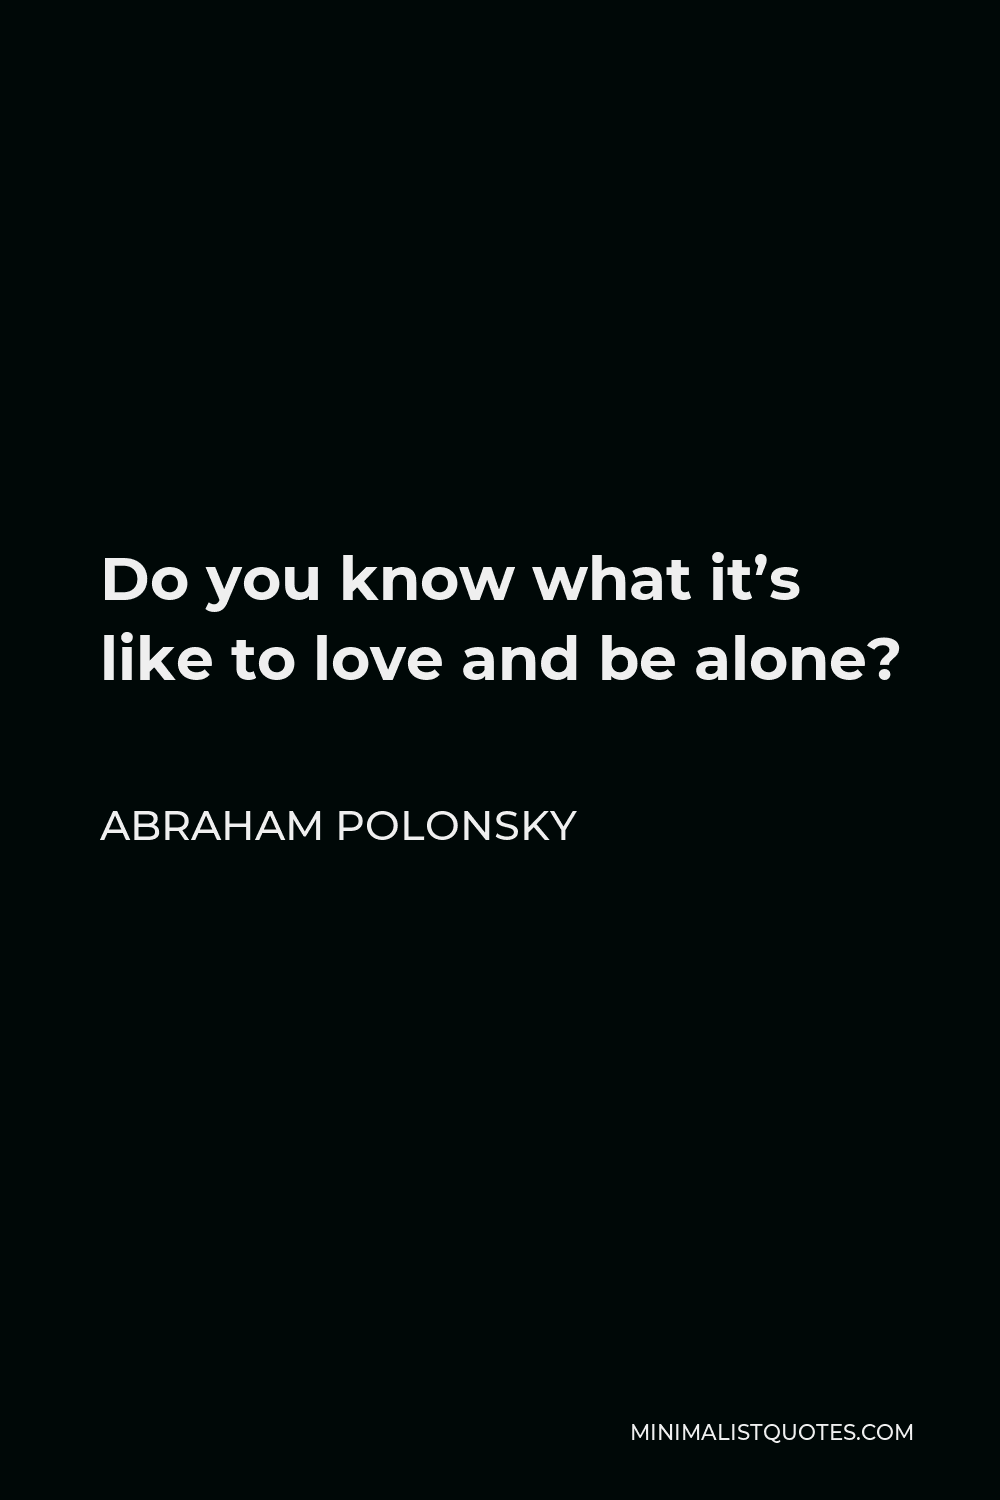 Abraham Polonsky Quote - Do you know what it’s like to love and be alone?